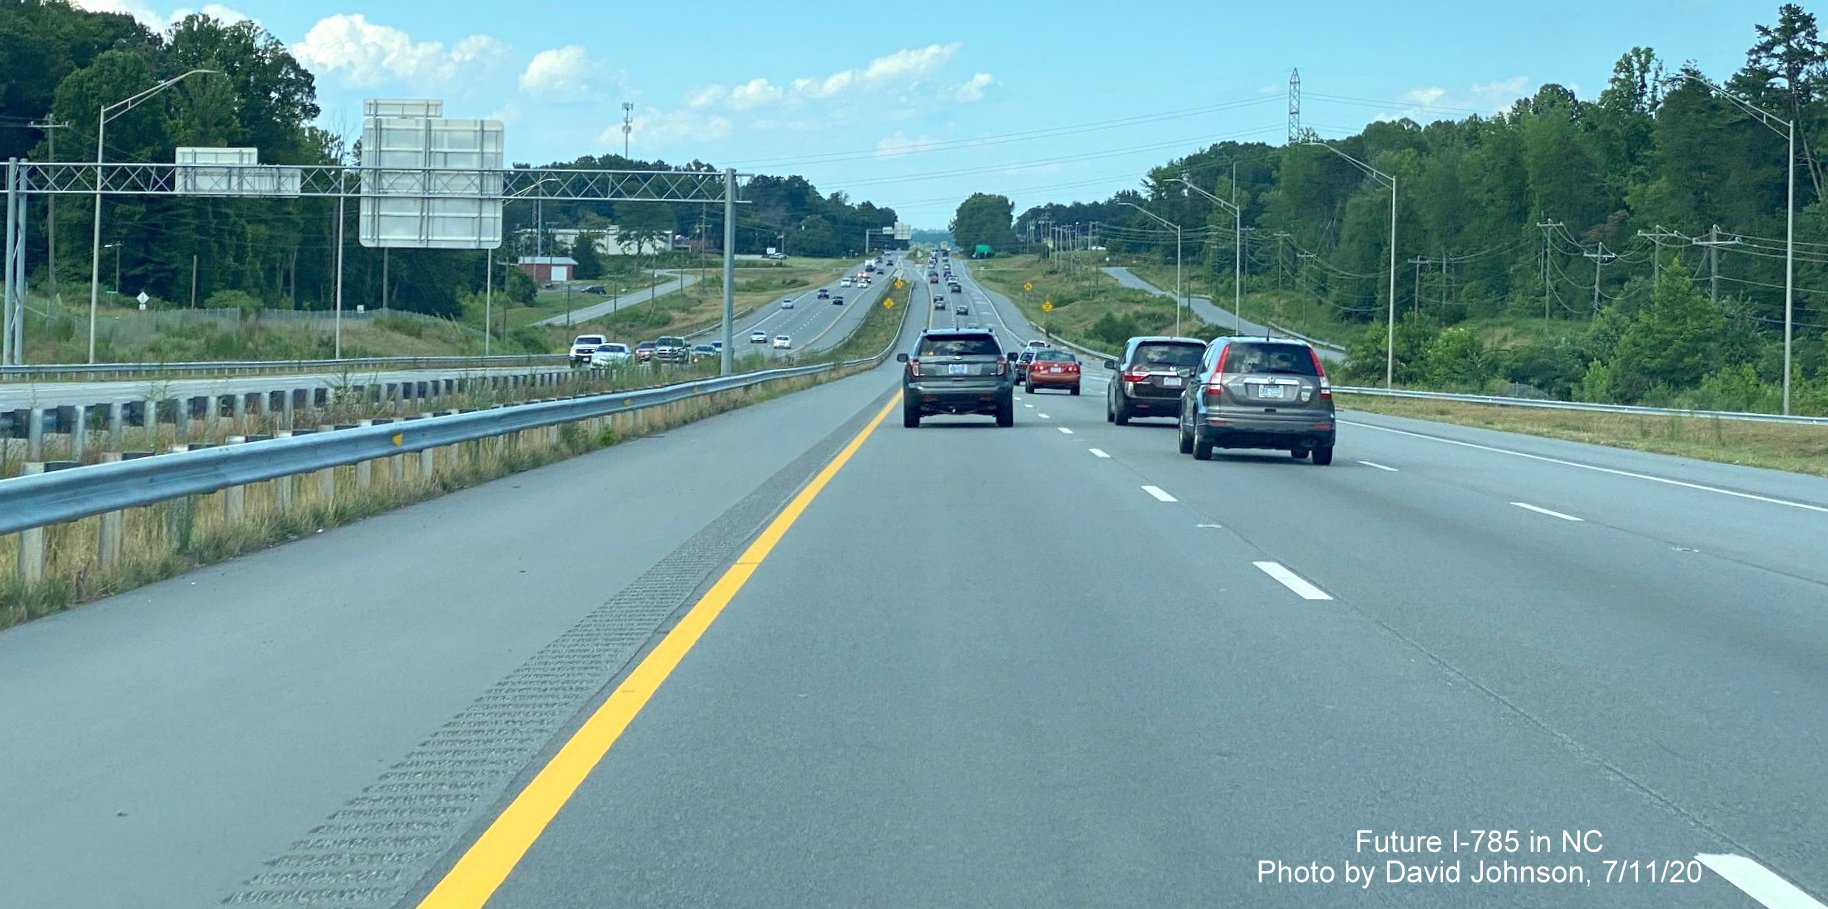 Image of US 29 North approaching ramp from I-785 North Greensboro Loop where interstate will continue along US 29 North to Virginia in future by David Johnson July 2020